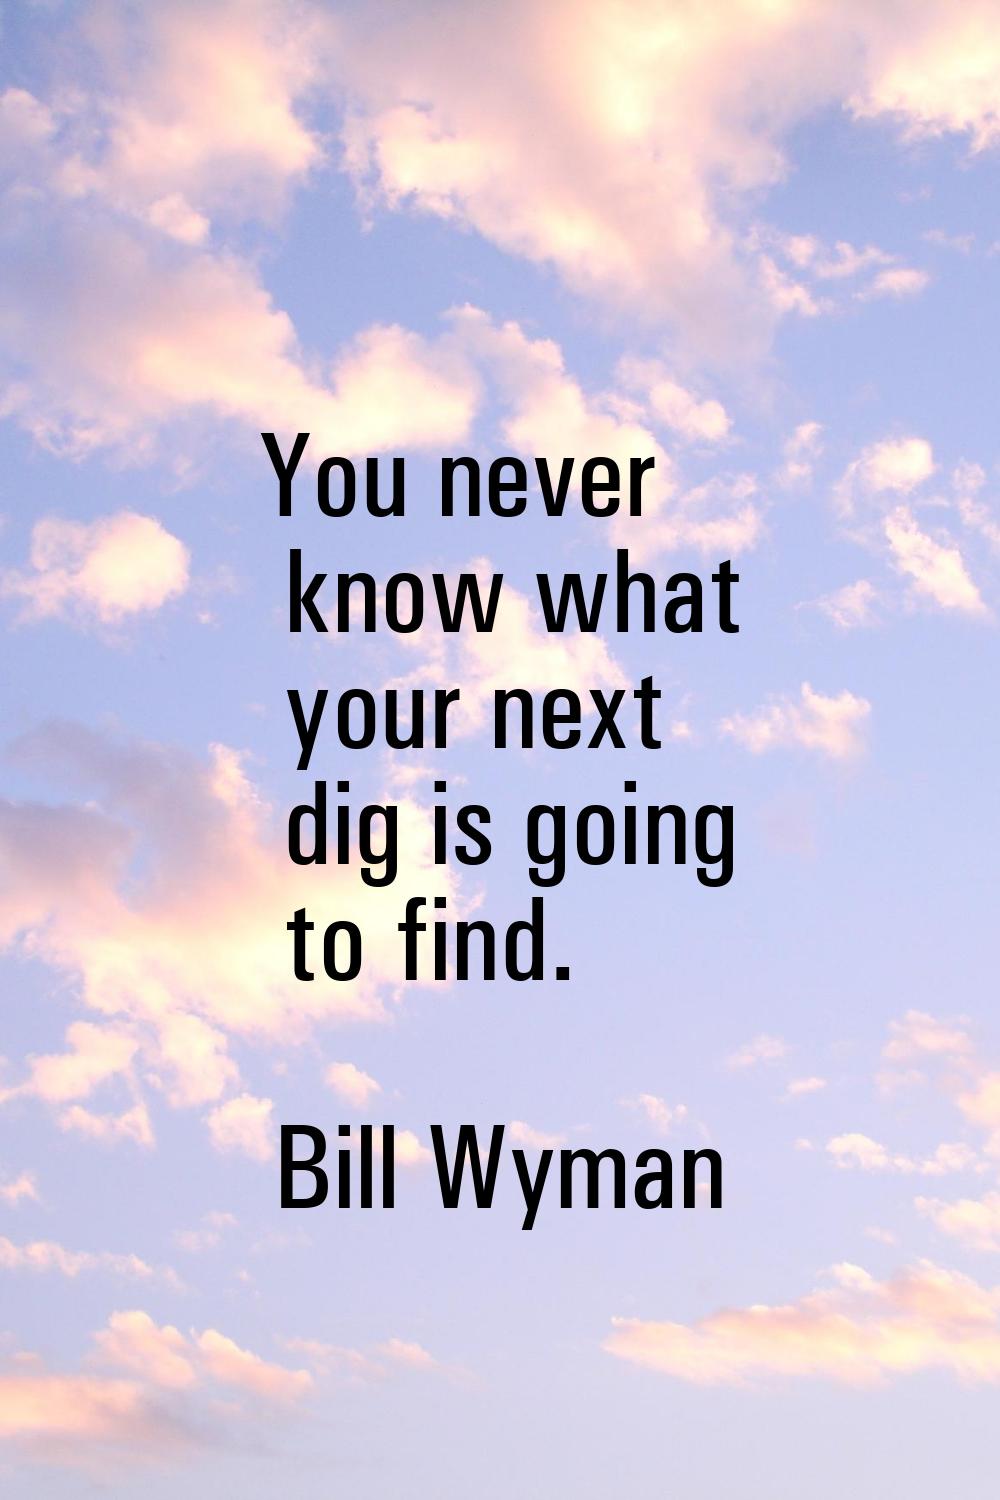 You never know what your next dig is going to find.